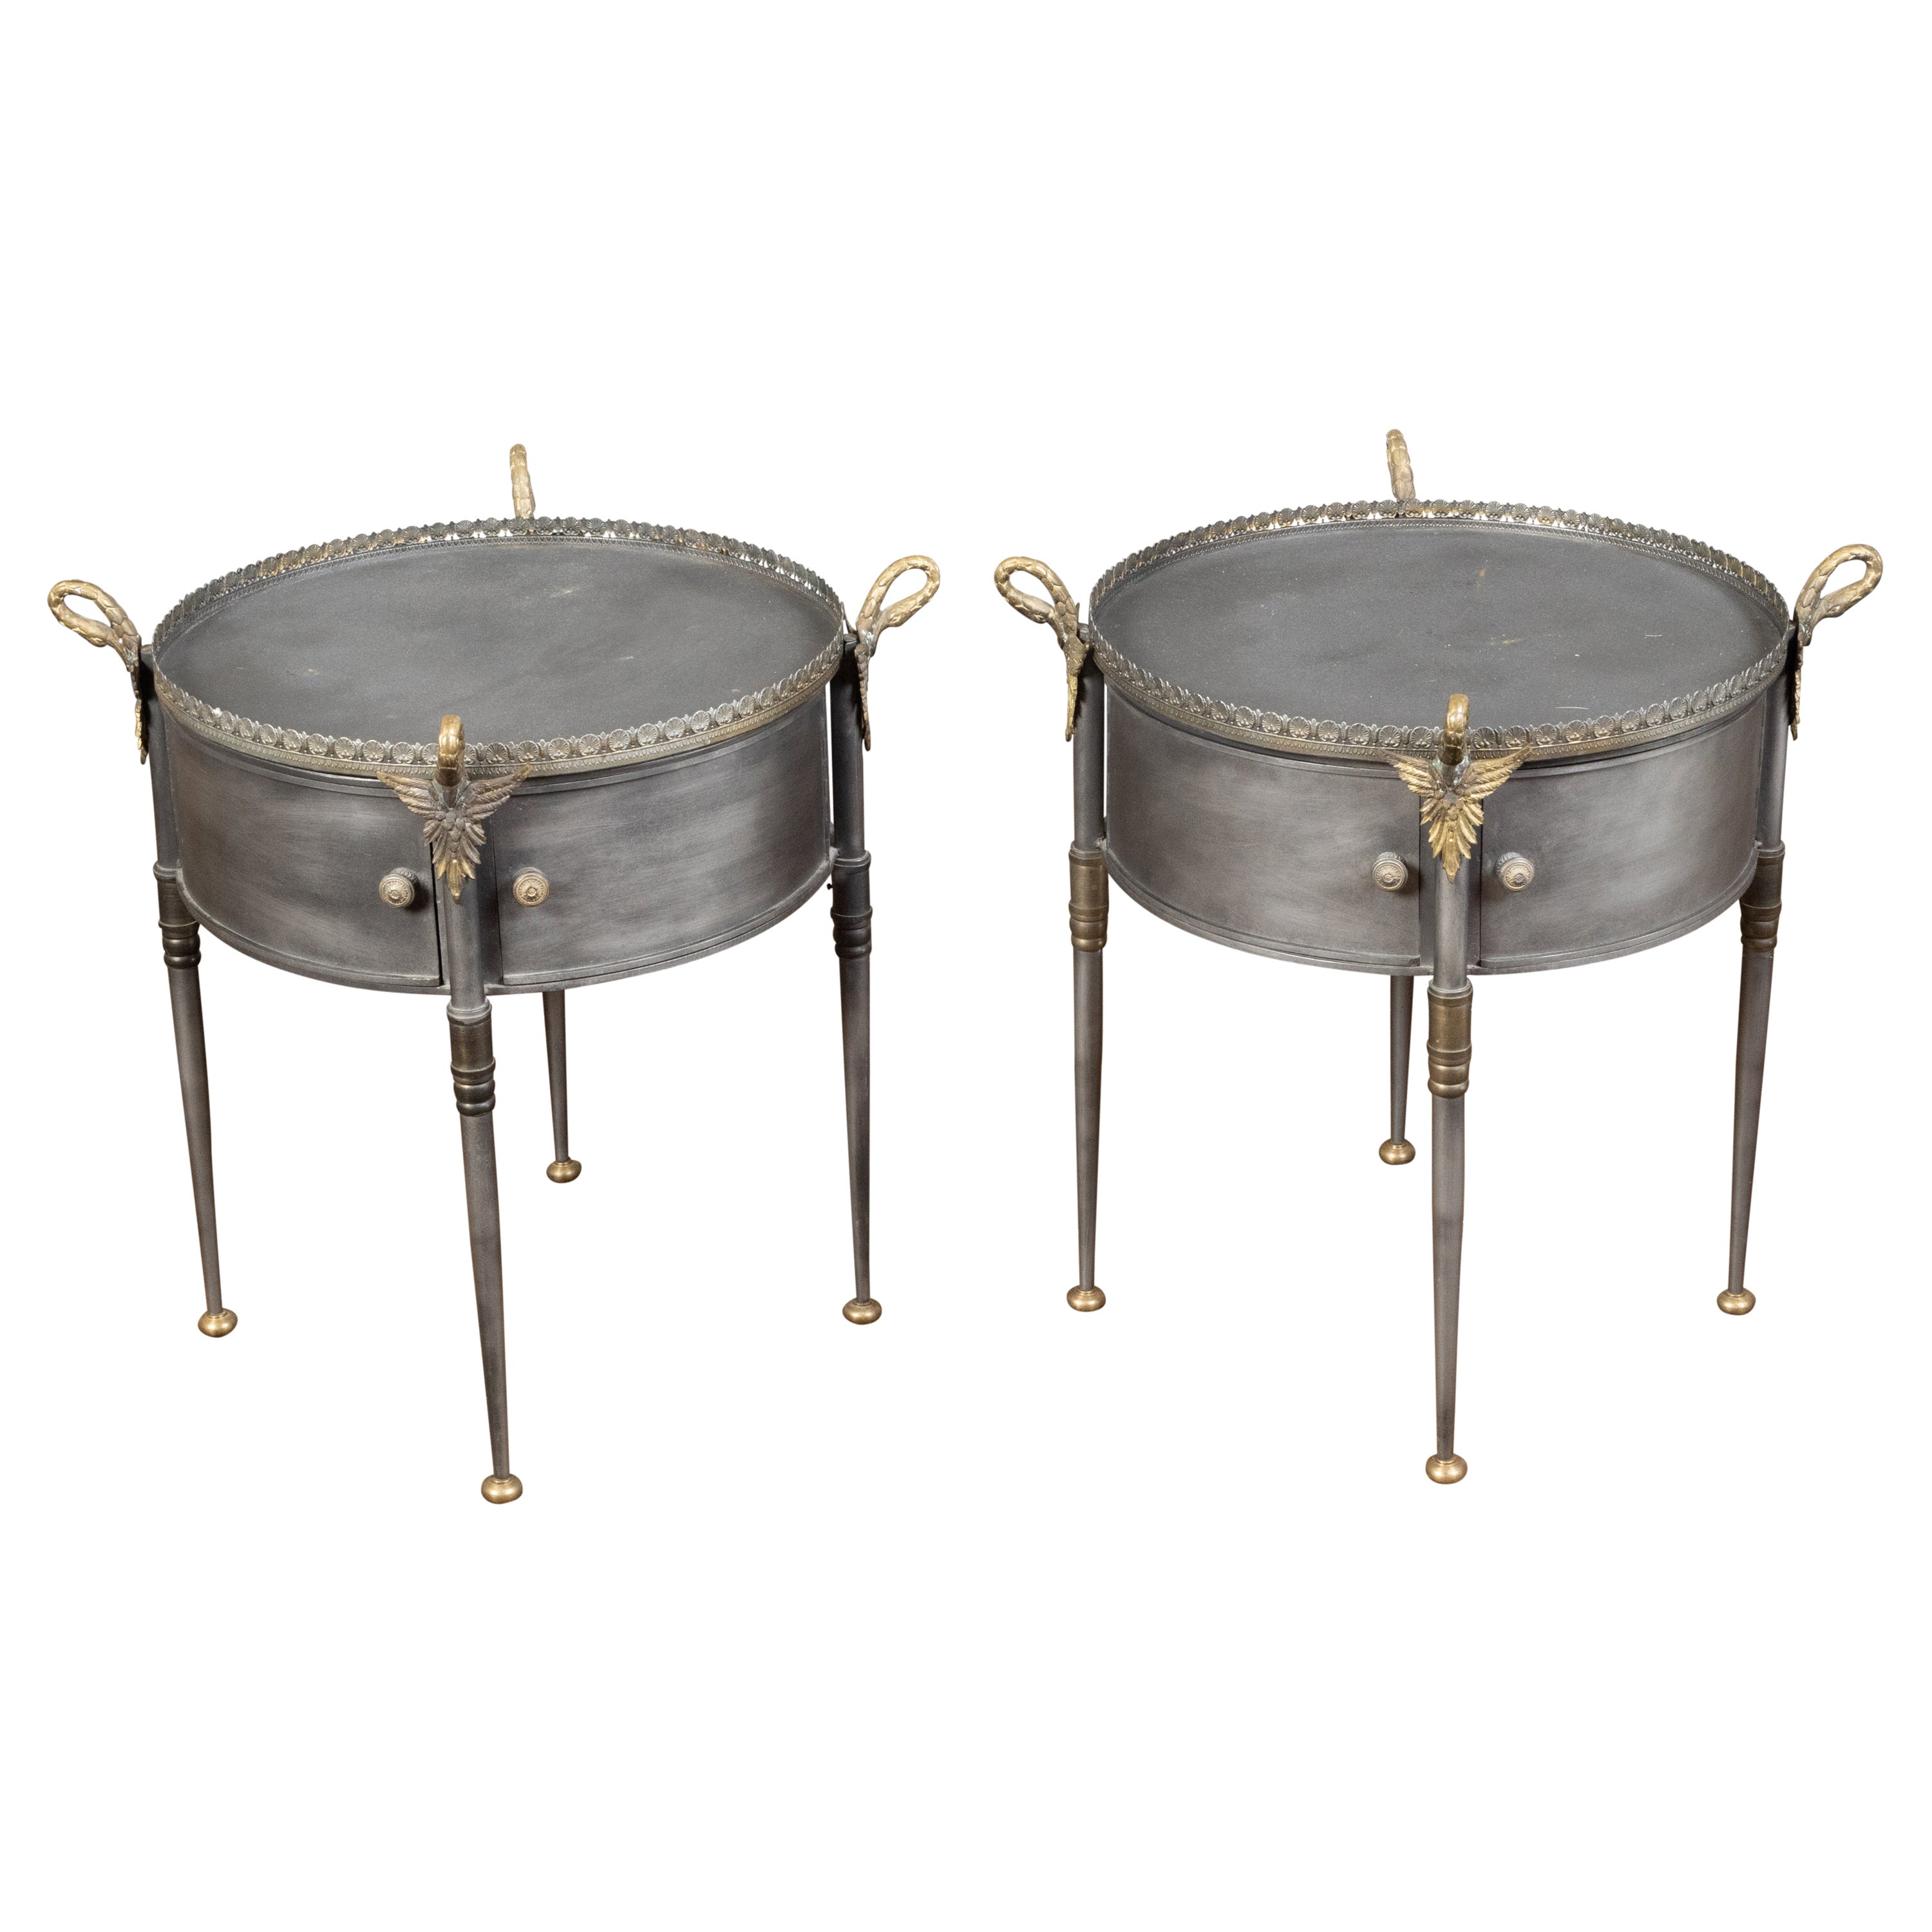 Pair of Trouvailles Metal and Brass Side Tables with Swan Necks and Doors